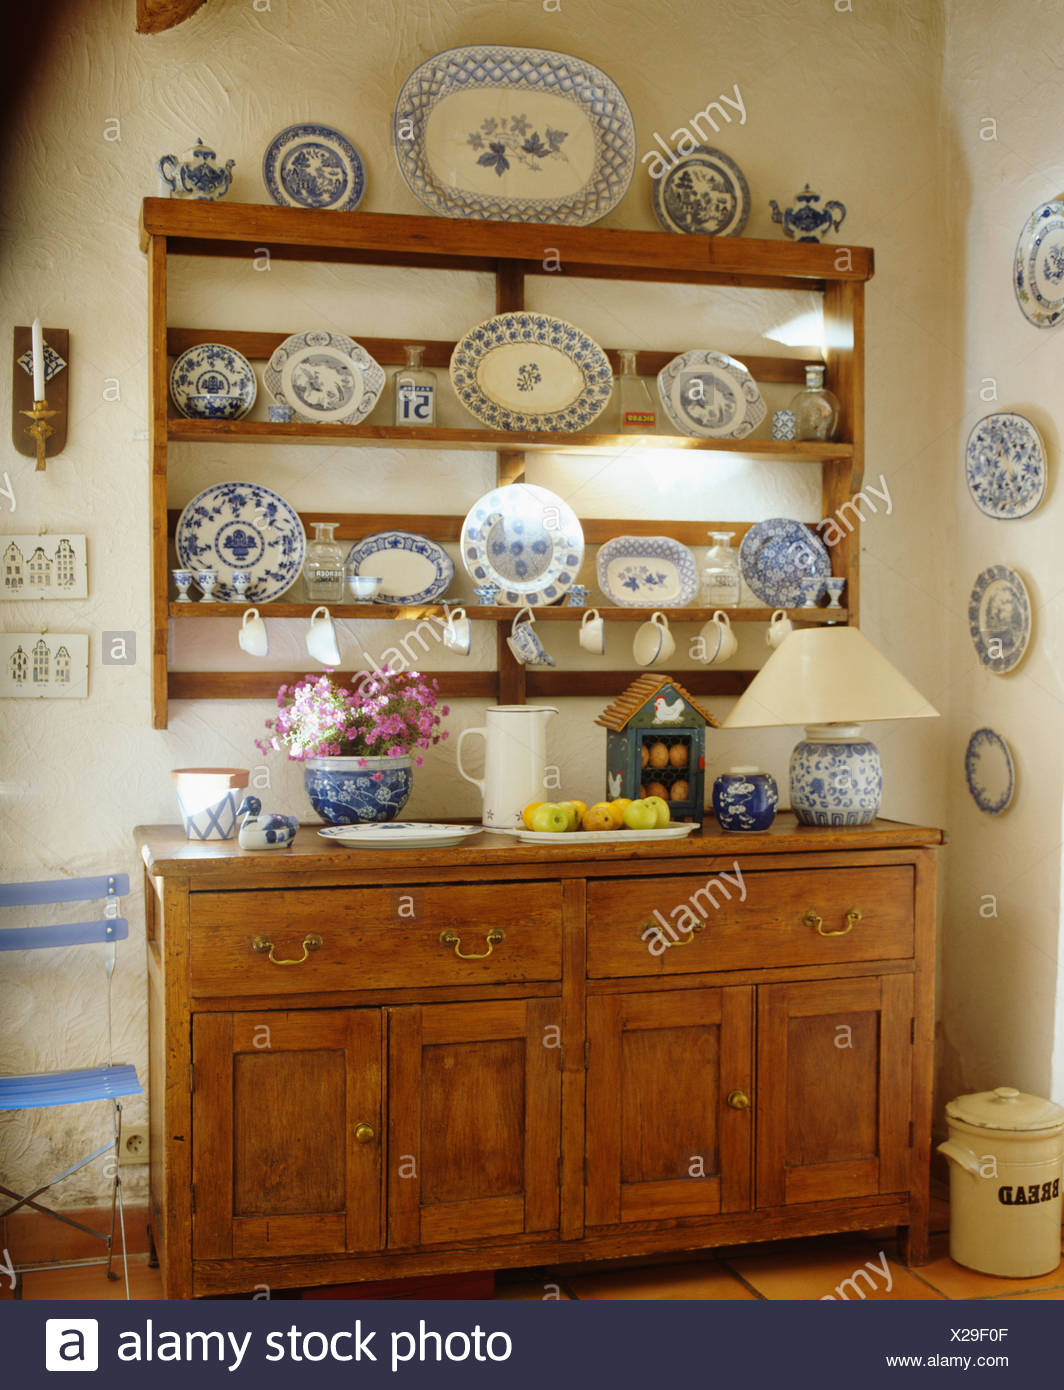 Collection Of Blue White Plates On Shelves Above Antique Pine